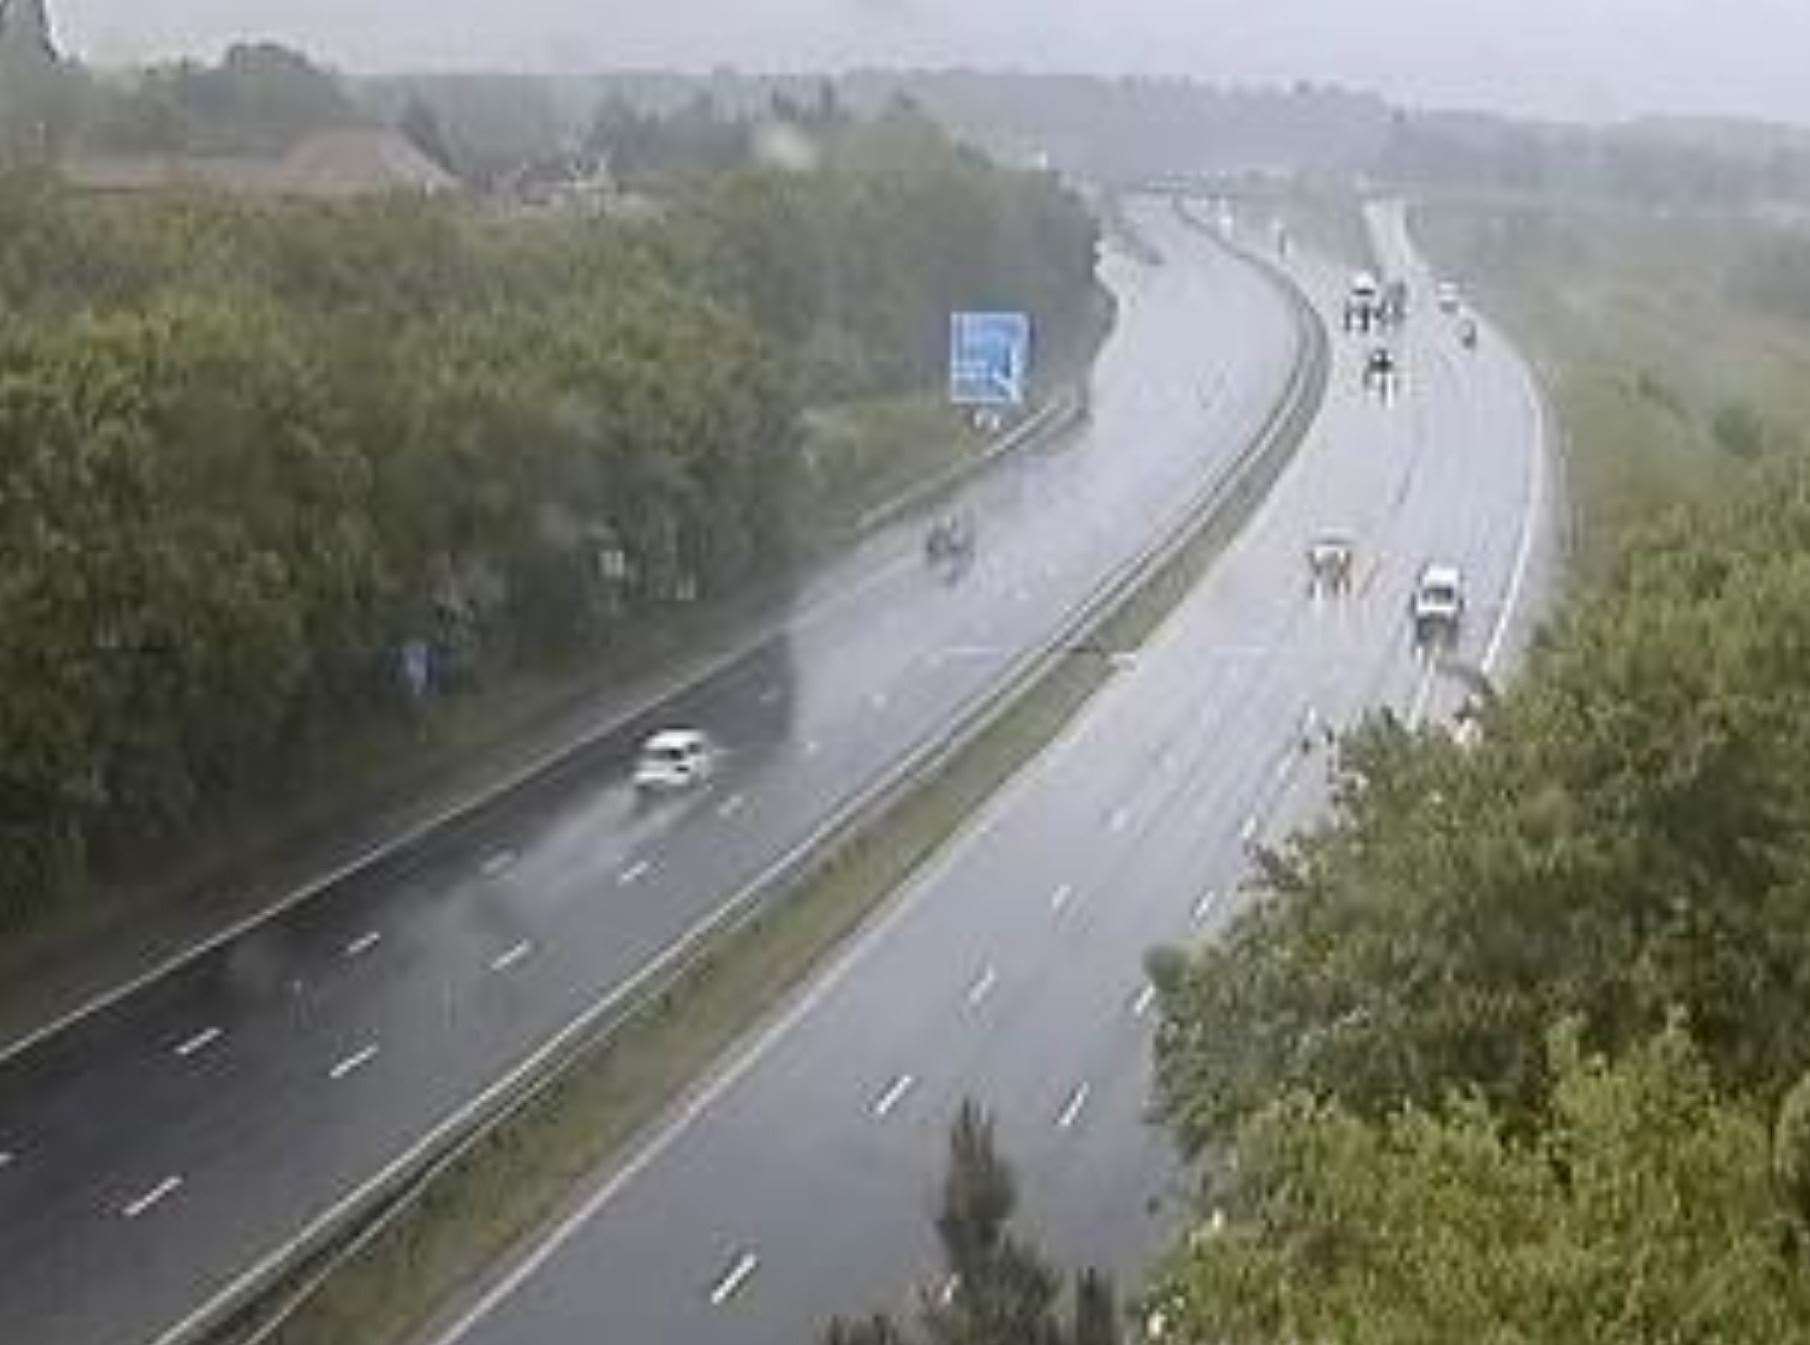 A lane on the M20 London-bound has been closed due to flooding. Photo: National Highways